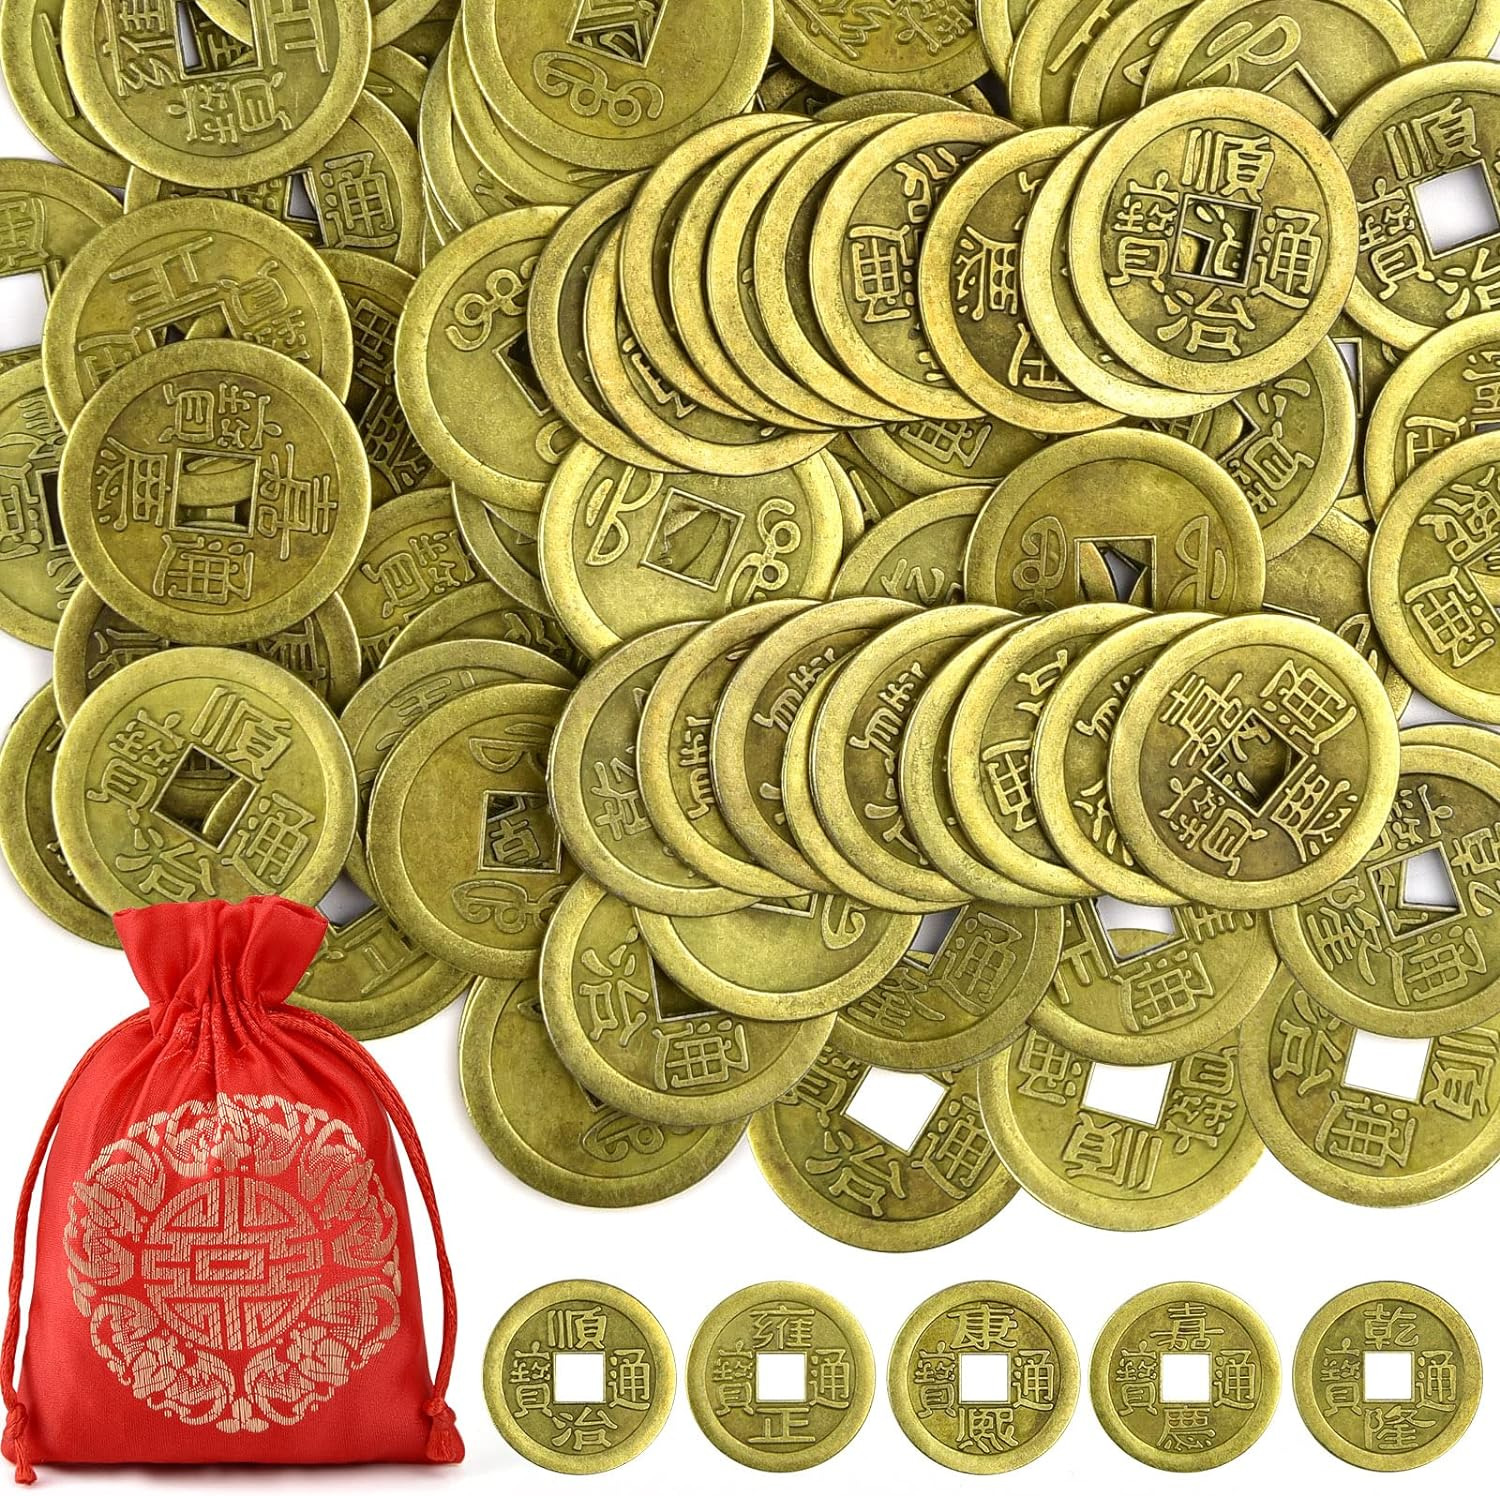 240 Pieces Chinese Fortune Coins Feng Shui I-Ching Coins Chinese Good Luck Coins